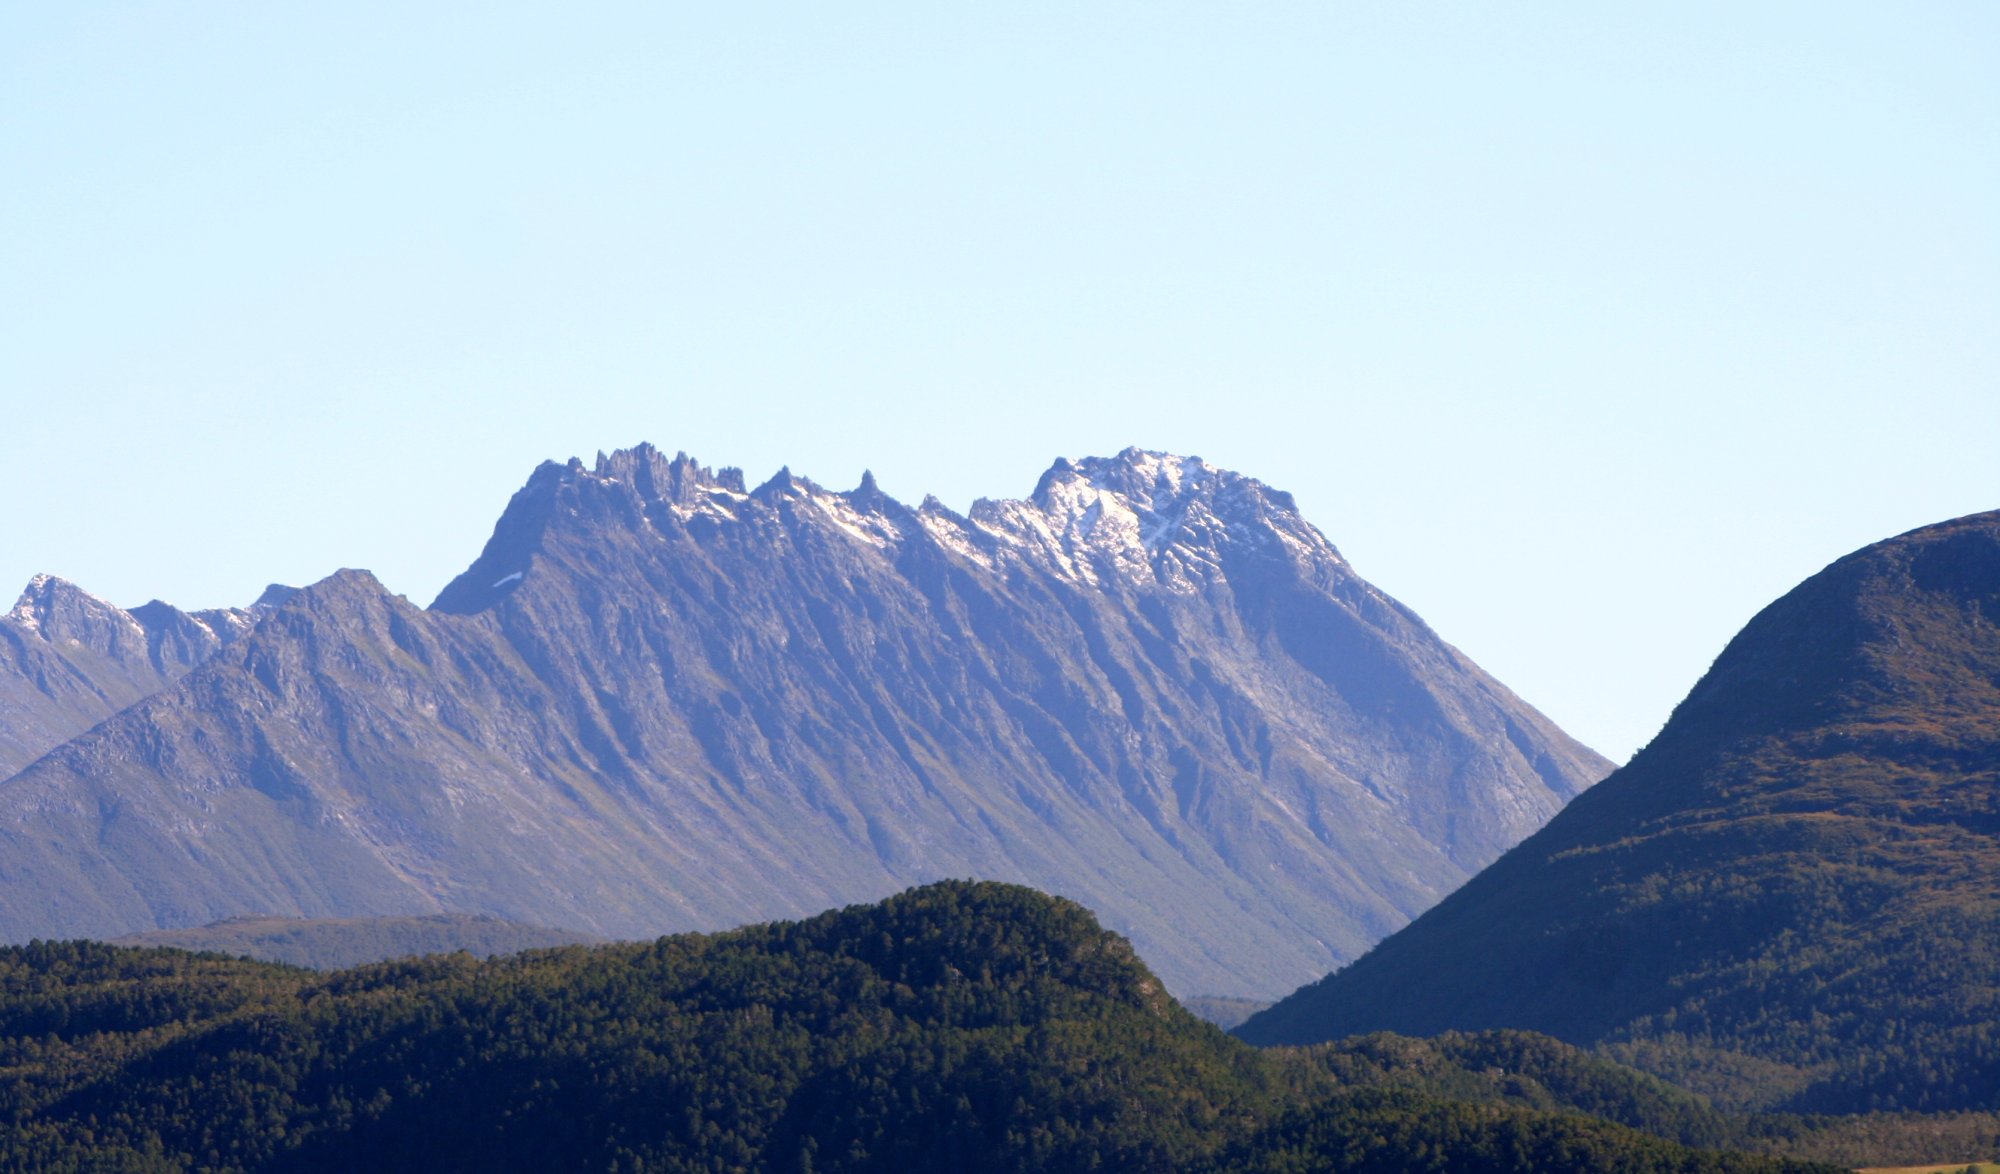 File:Mountain view from home3.jpg - Wikimedia Commons